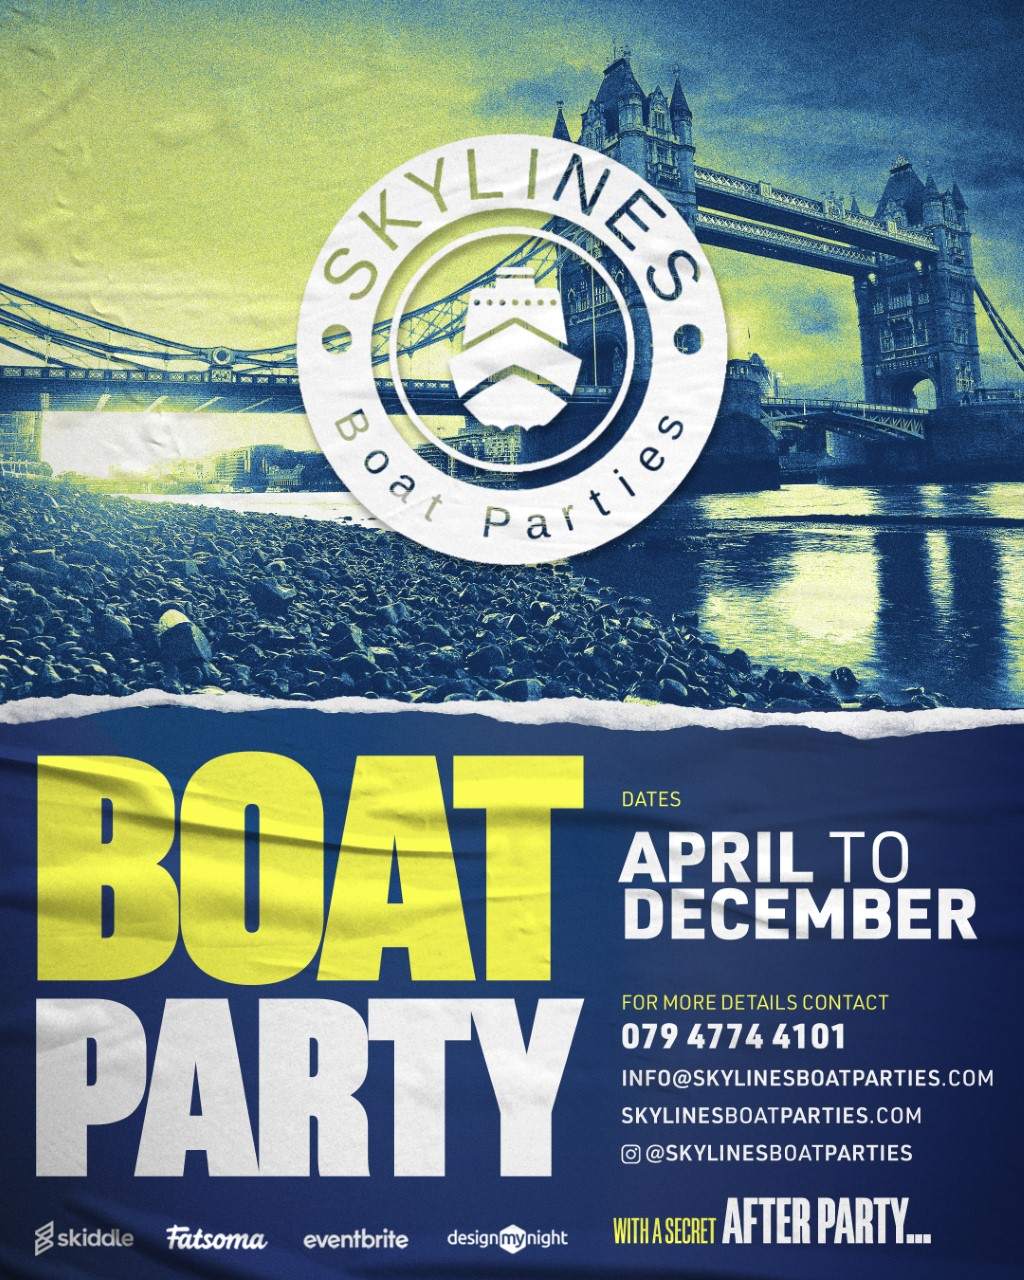 Boat Party with a free after party - フライヤー表